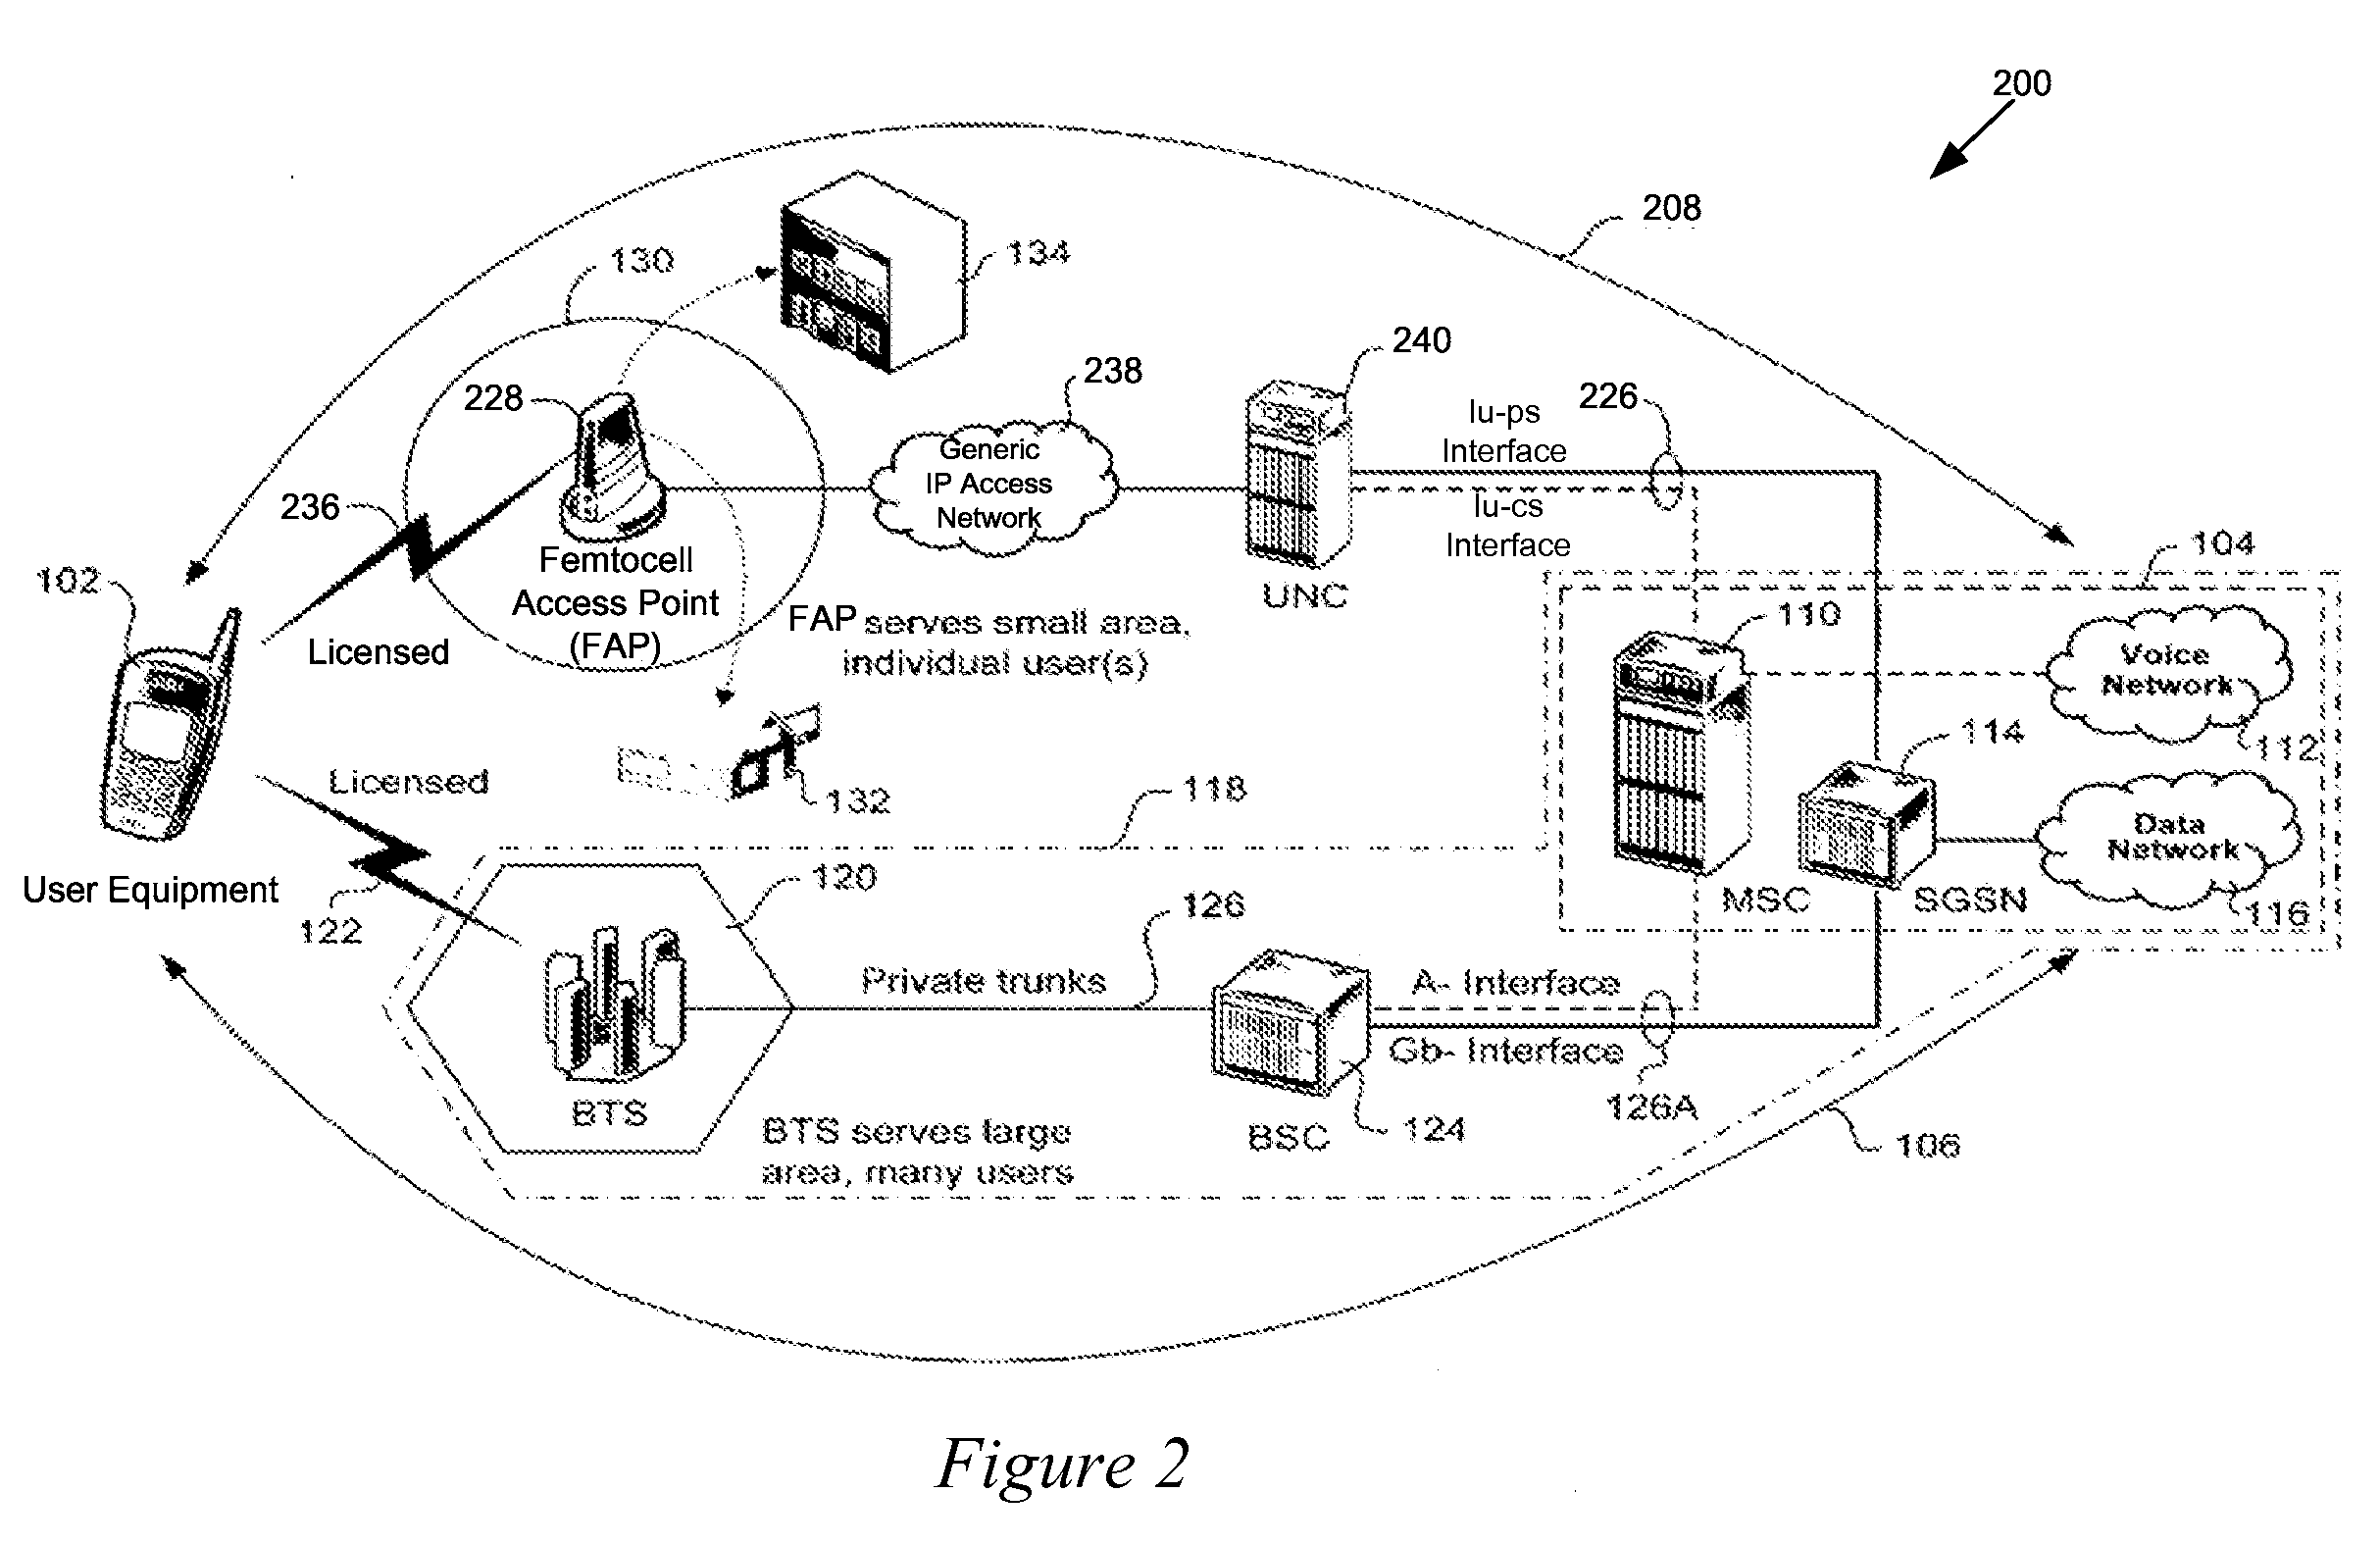 Method and system of providing landline equivalent location information over an integrated communication system